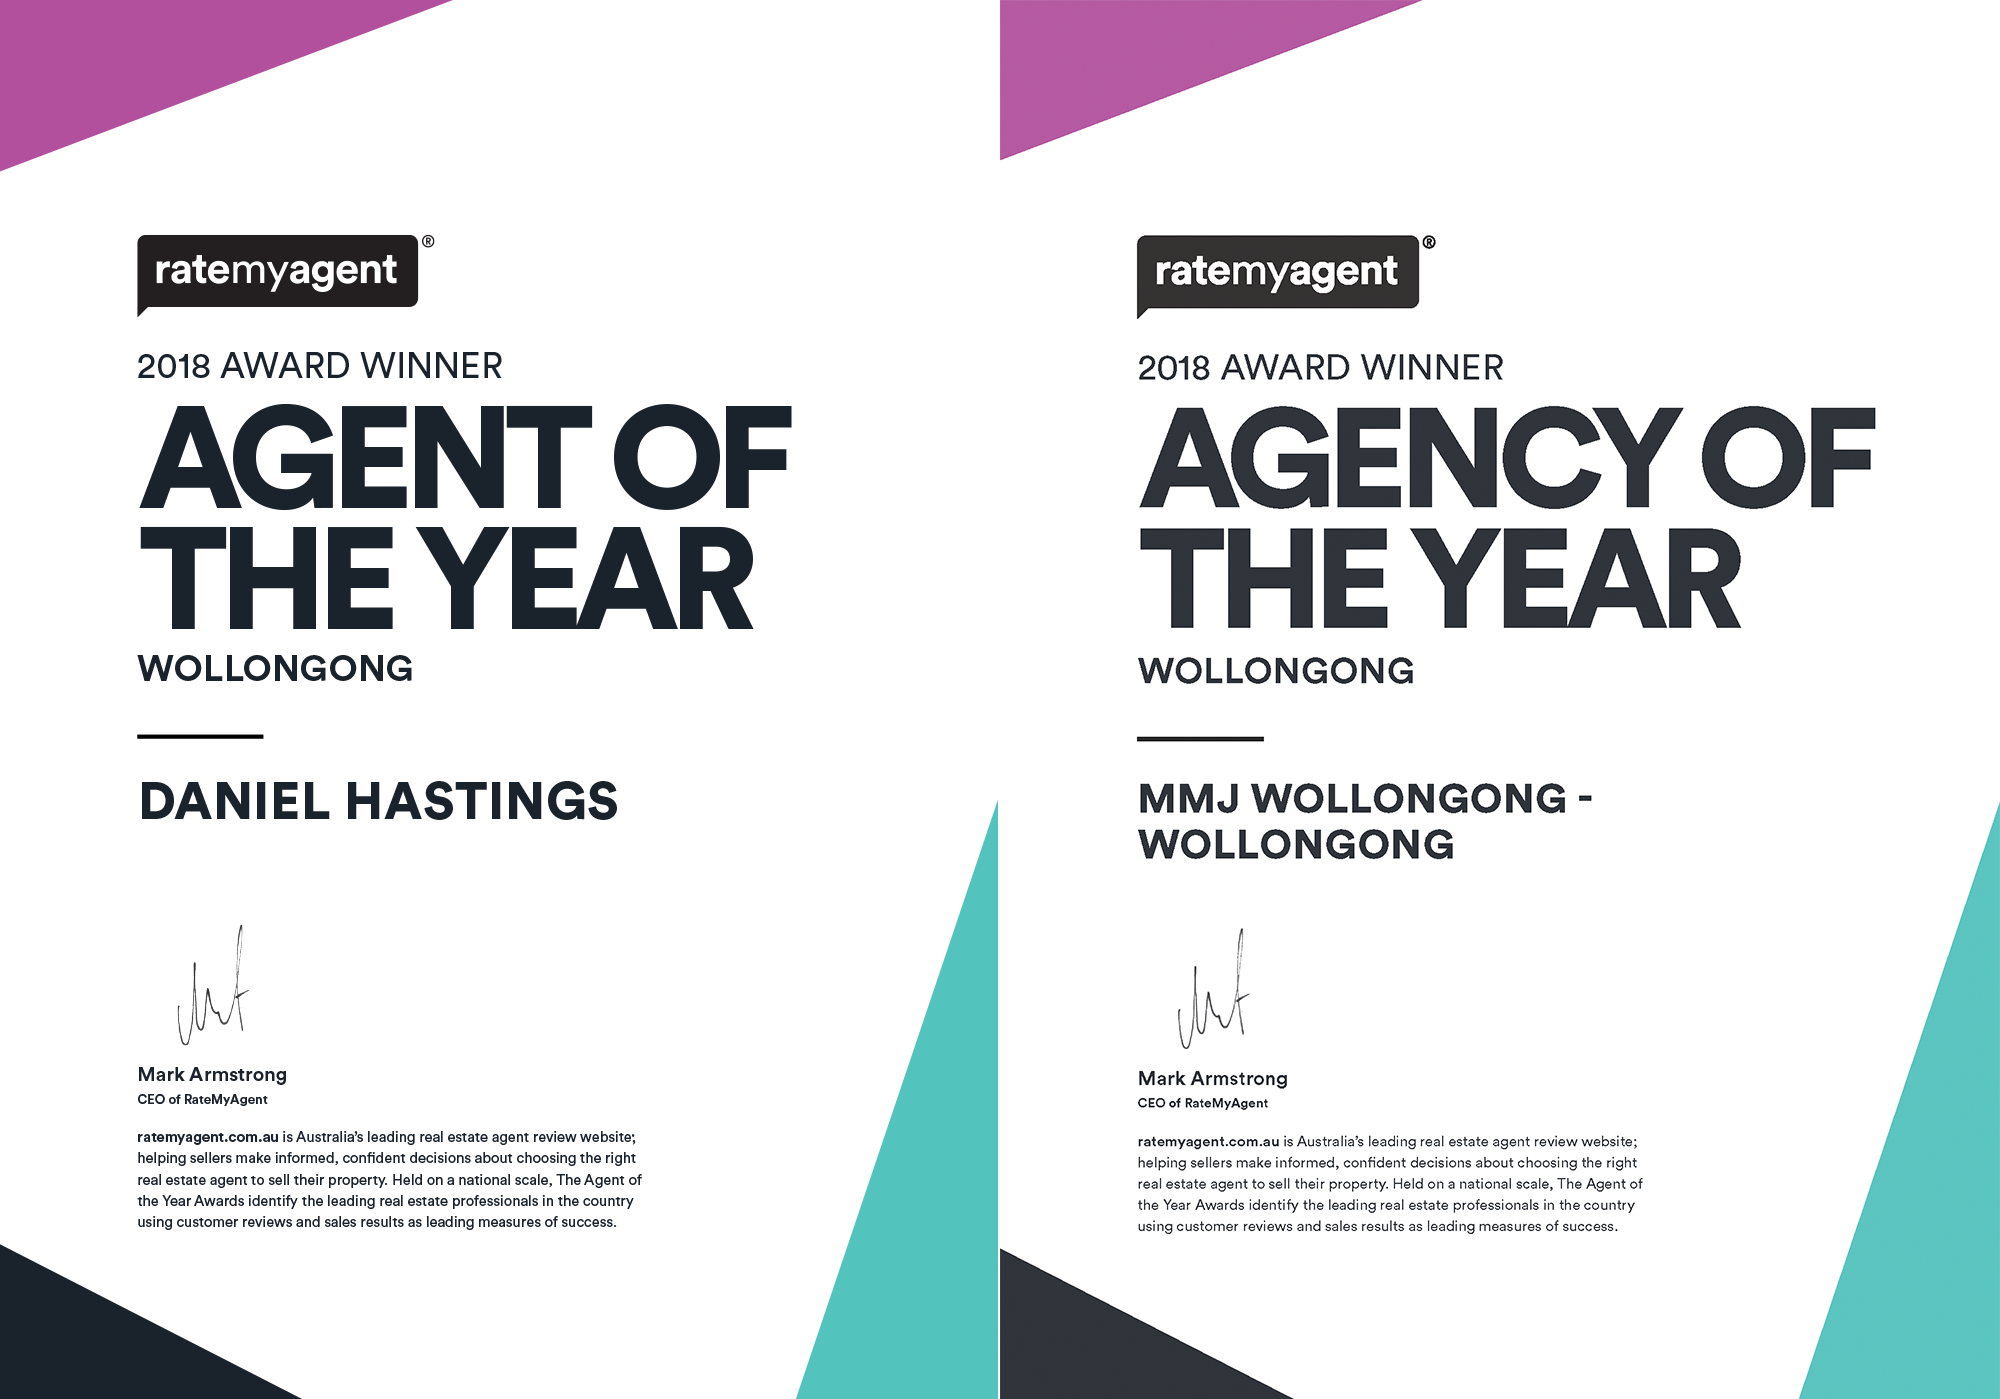 MMJ Awarded Agency of the Year for the second consecutive year.